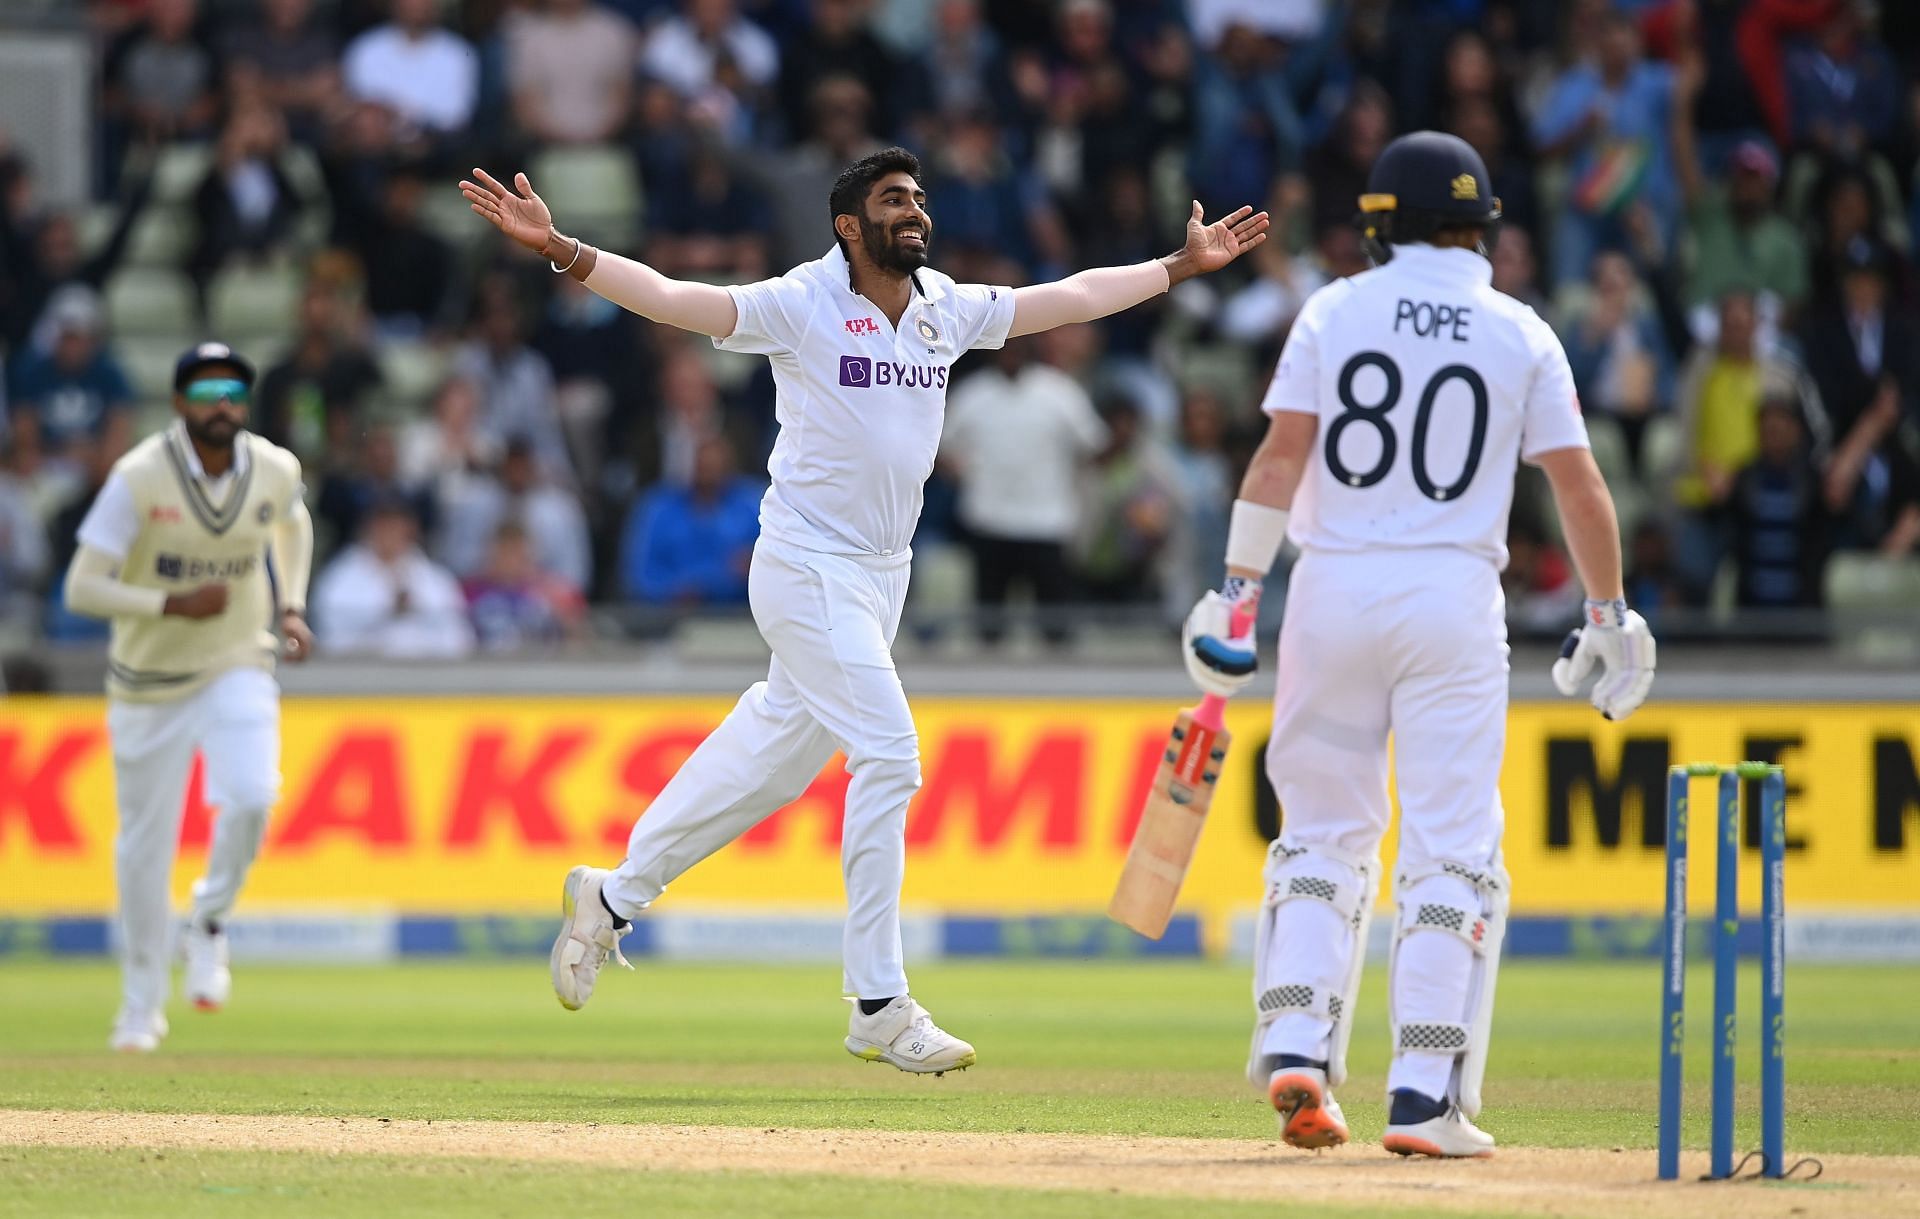 Jasprit Bumrah celebrates taking the wicket of Ollie Pope. Pic: Getty Images